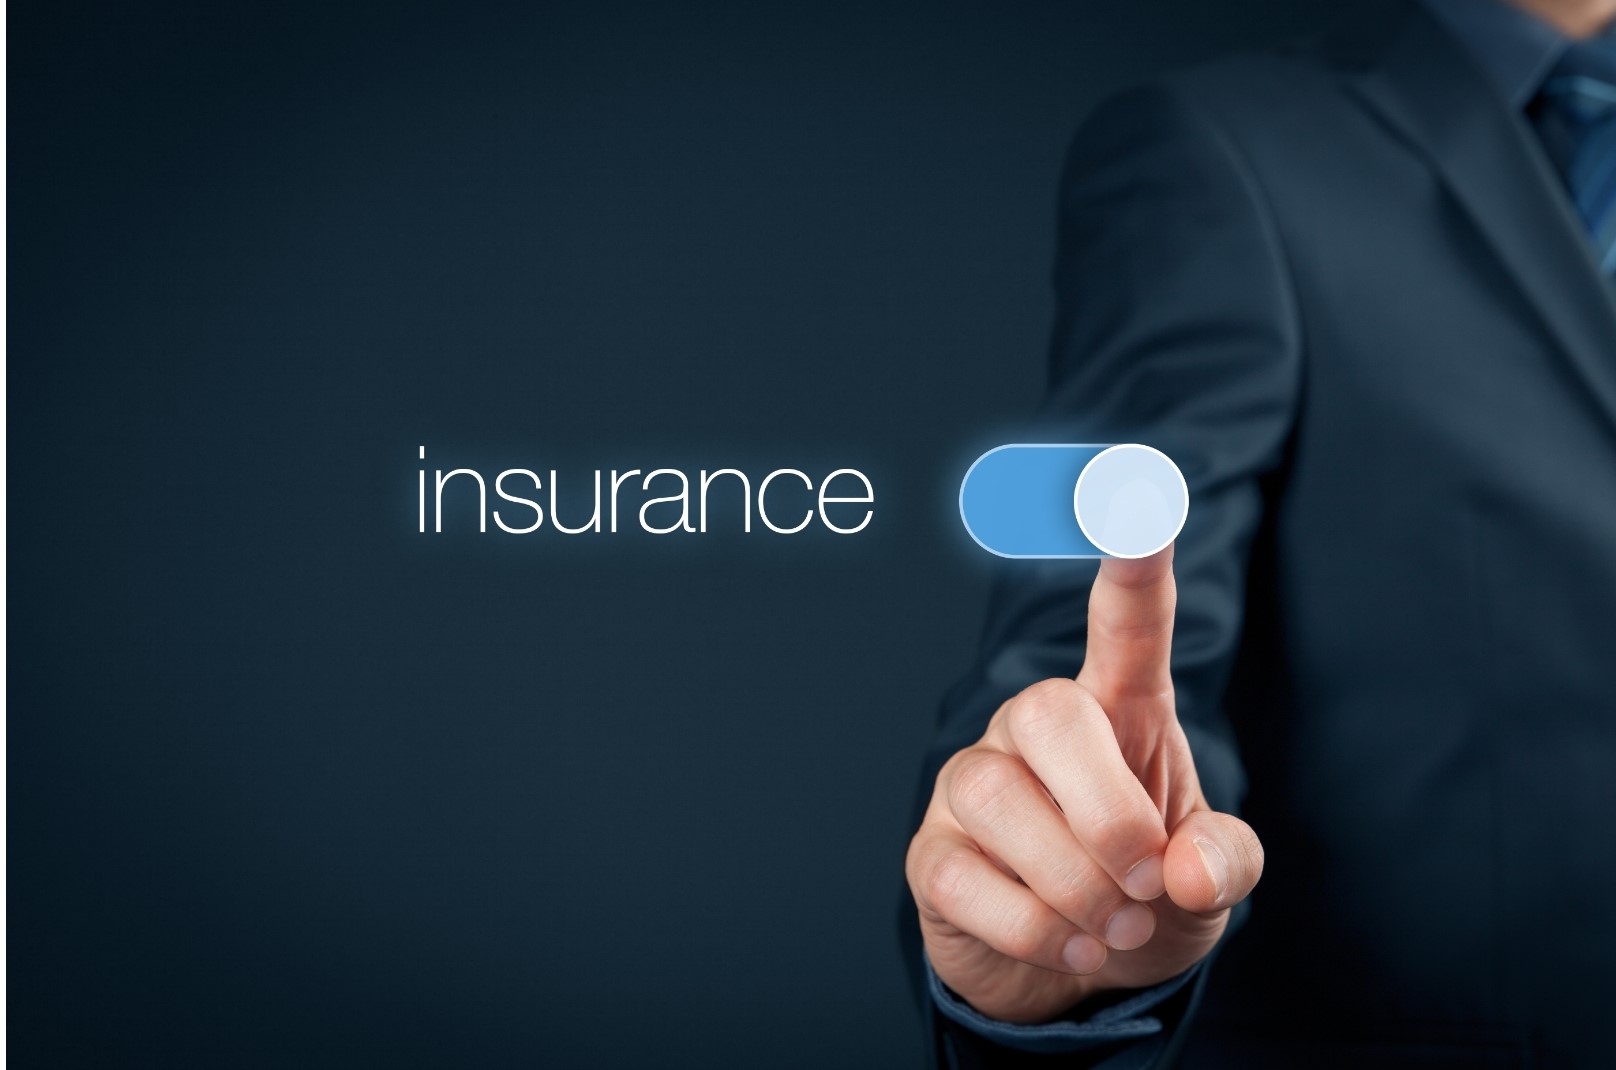 Background Verification Challenges in Insurance